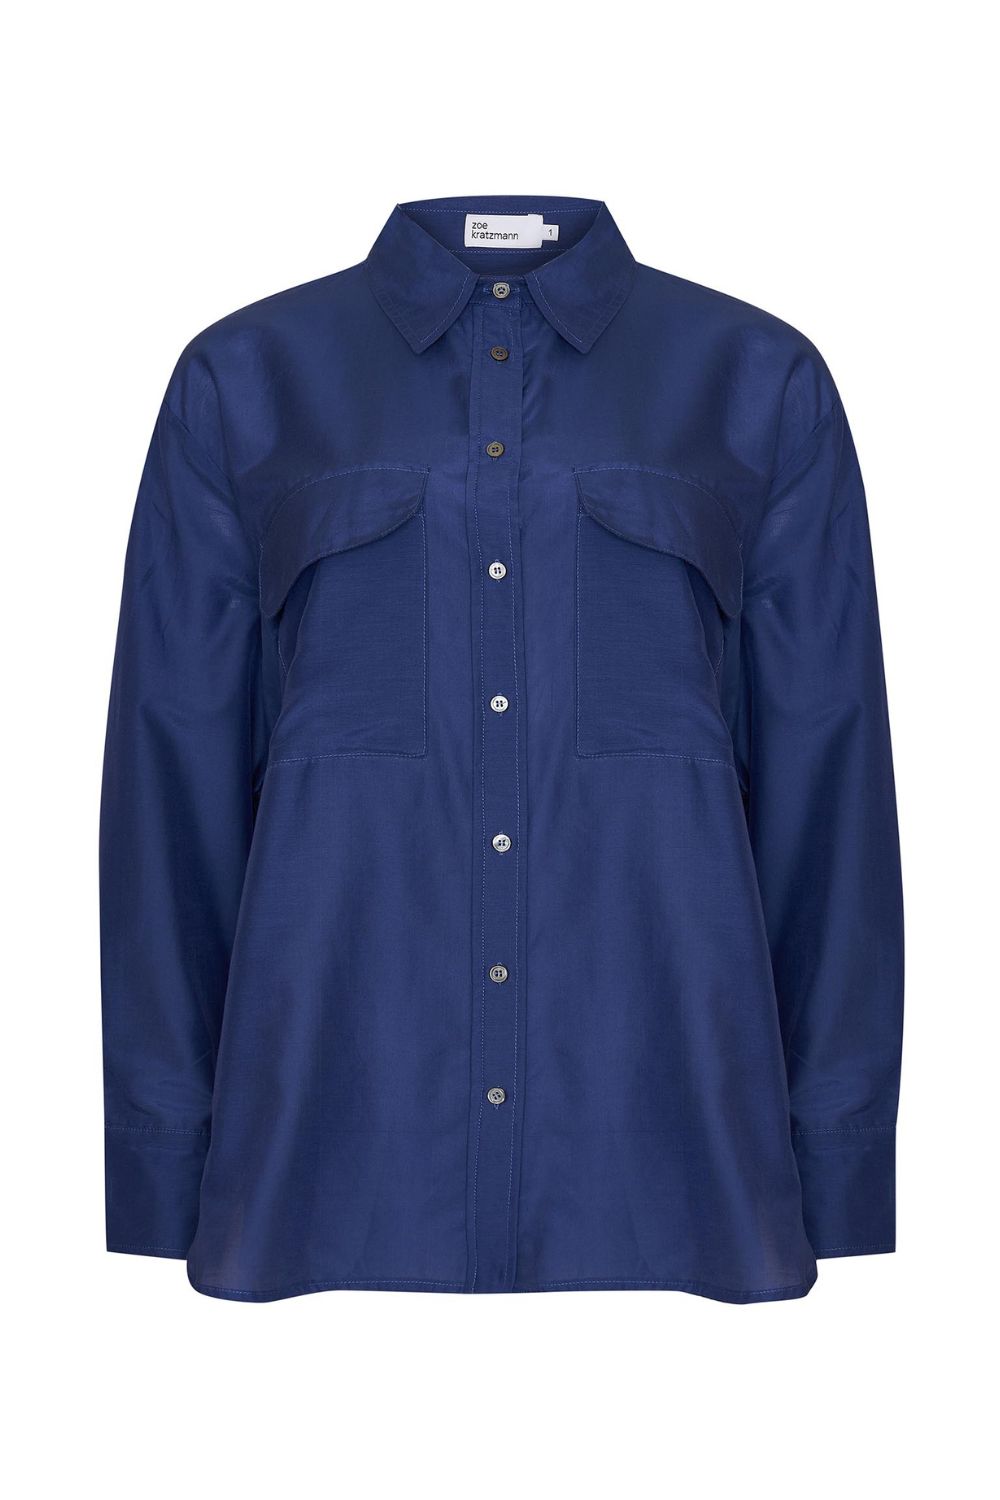 blue, shirt, long-sleeve, button-up shirt, collar, front patch pockets, side splits, product image